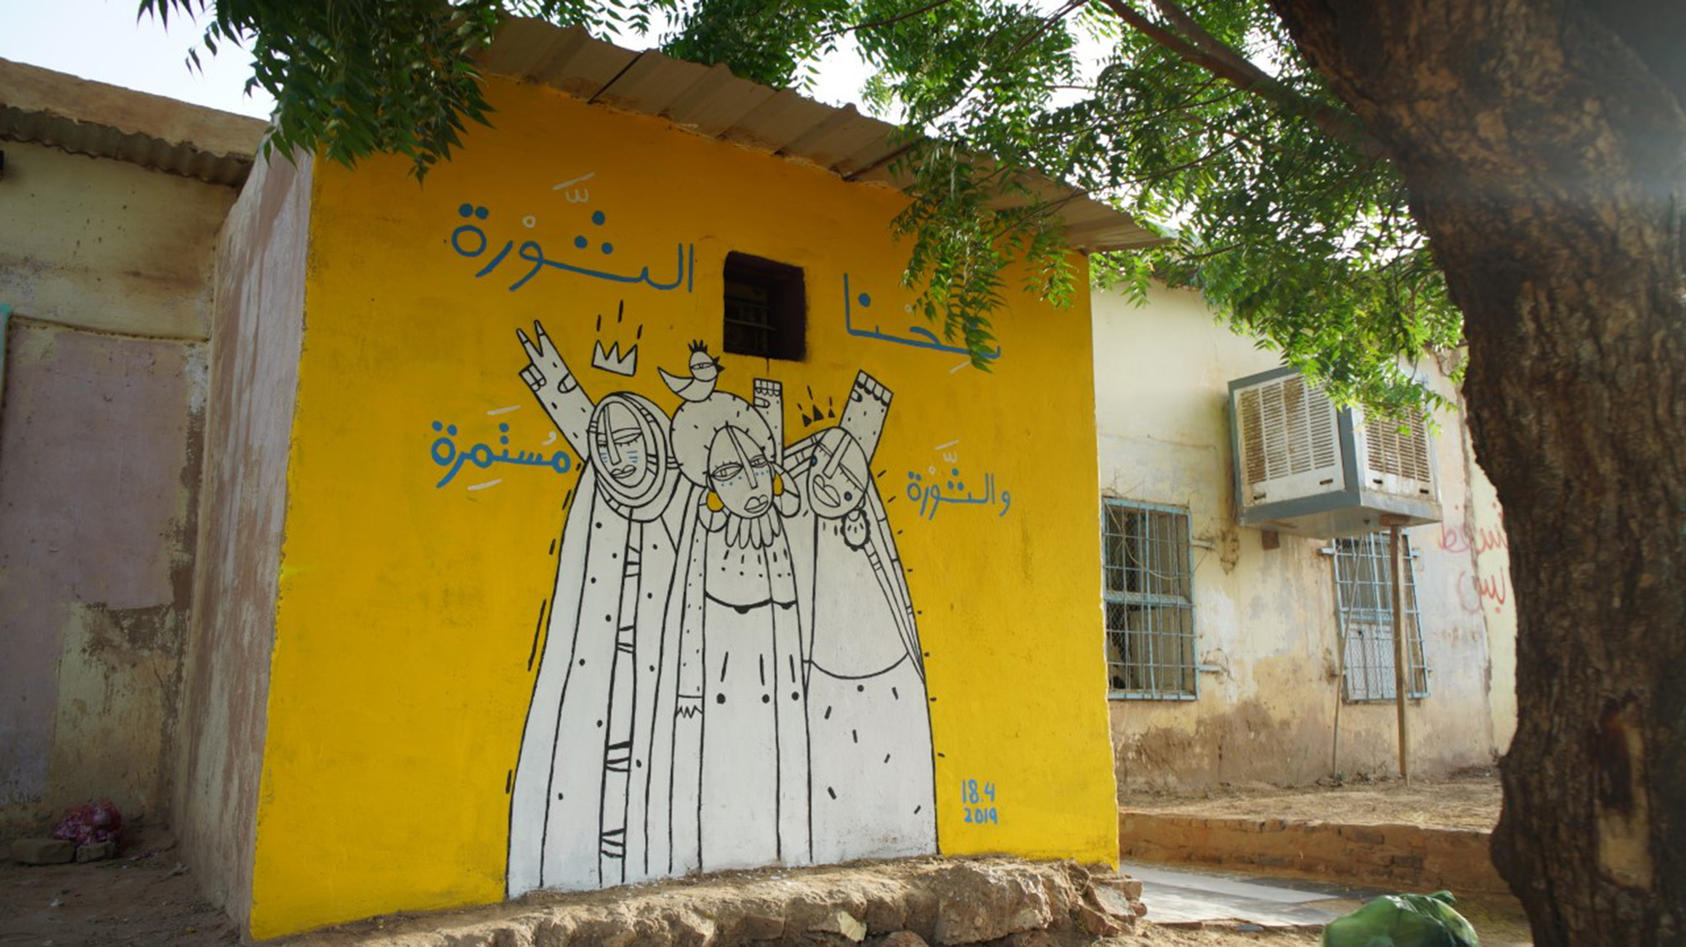 Alaa Satir painted this mural in Burri days after the fall of Omar al-Bashir and his immediate successor General Awad Ibn Auf, as protesters continued to demand a transition to civilian rule. (Ahmed Mahmoud)